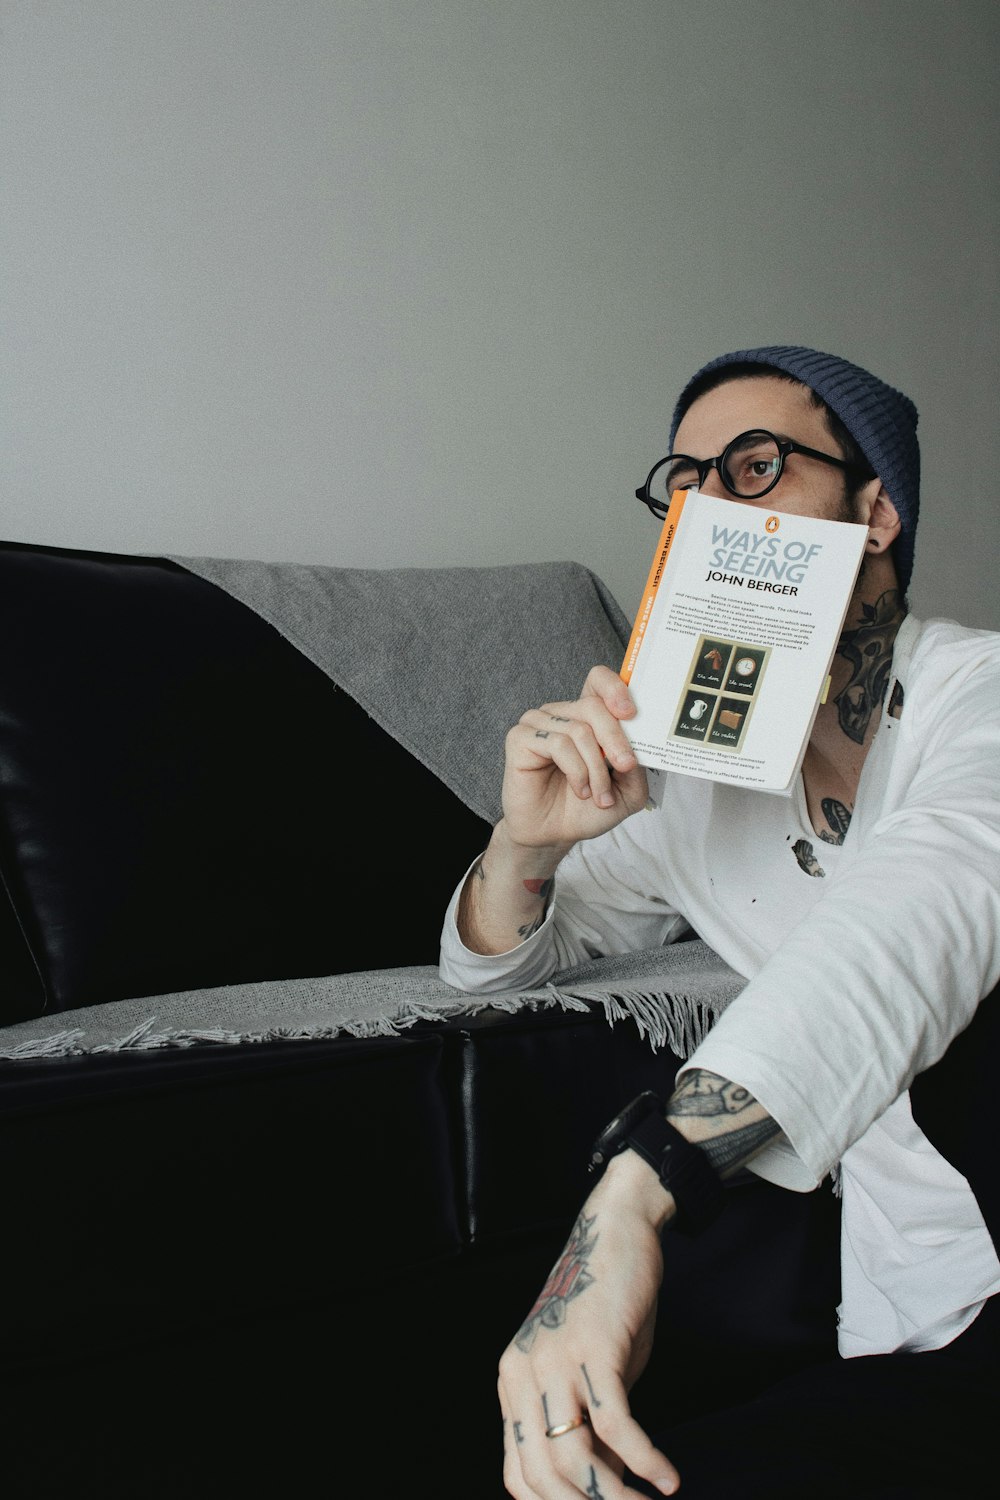 a man sitting on a couch holding up a book